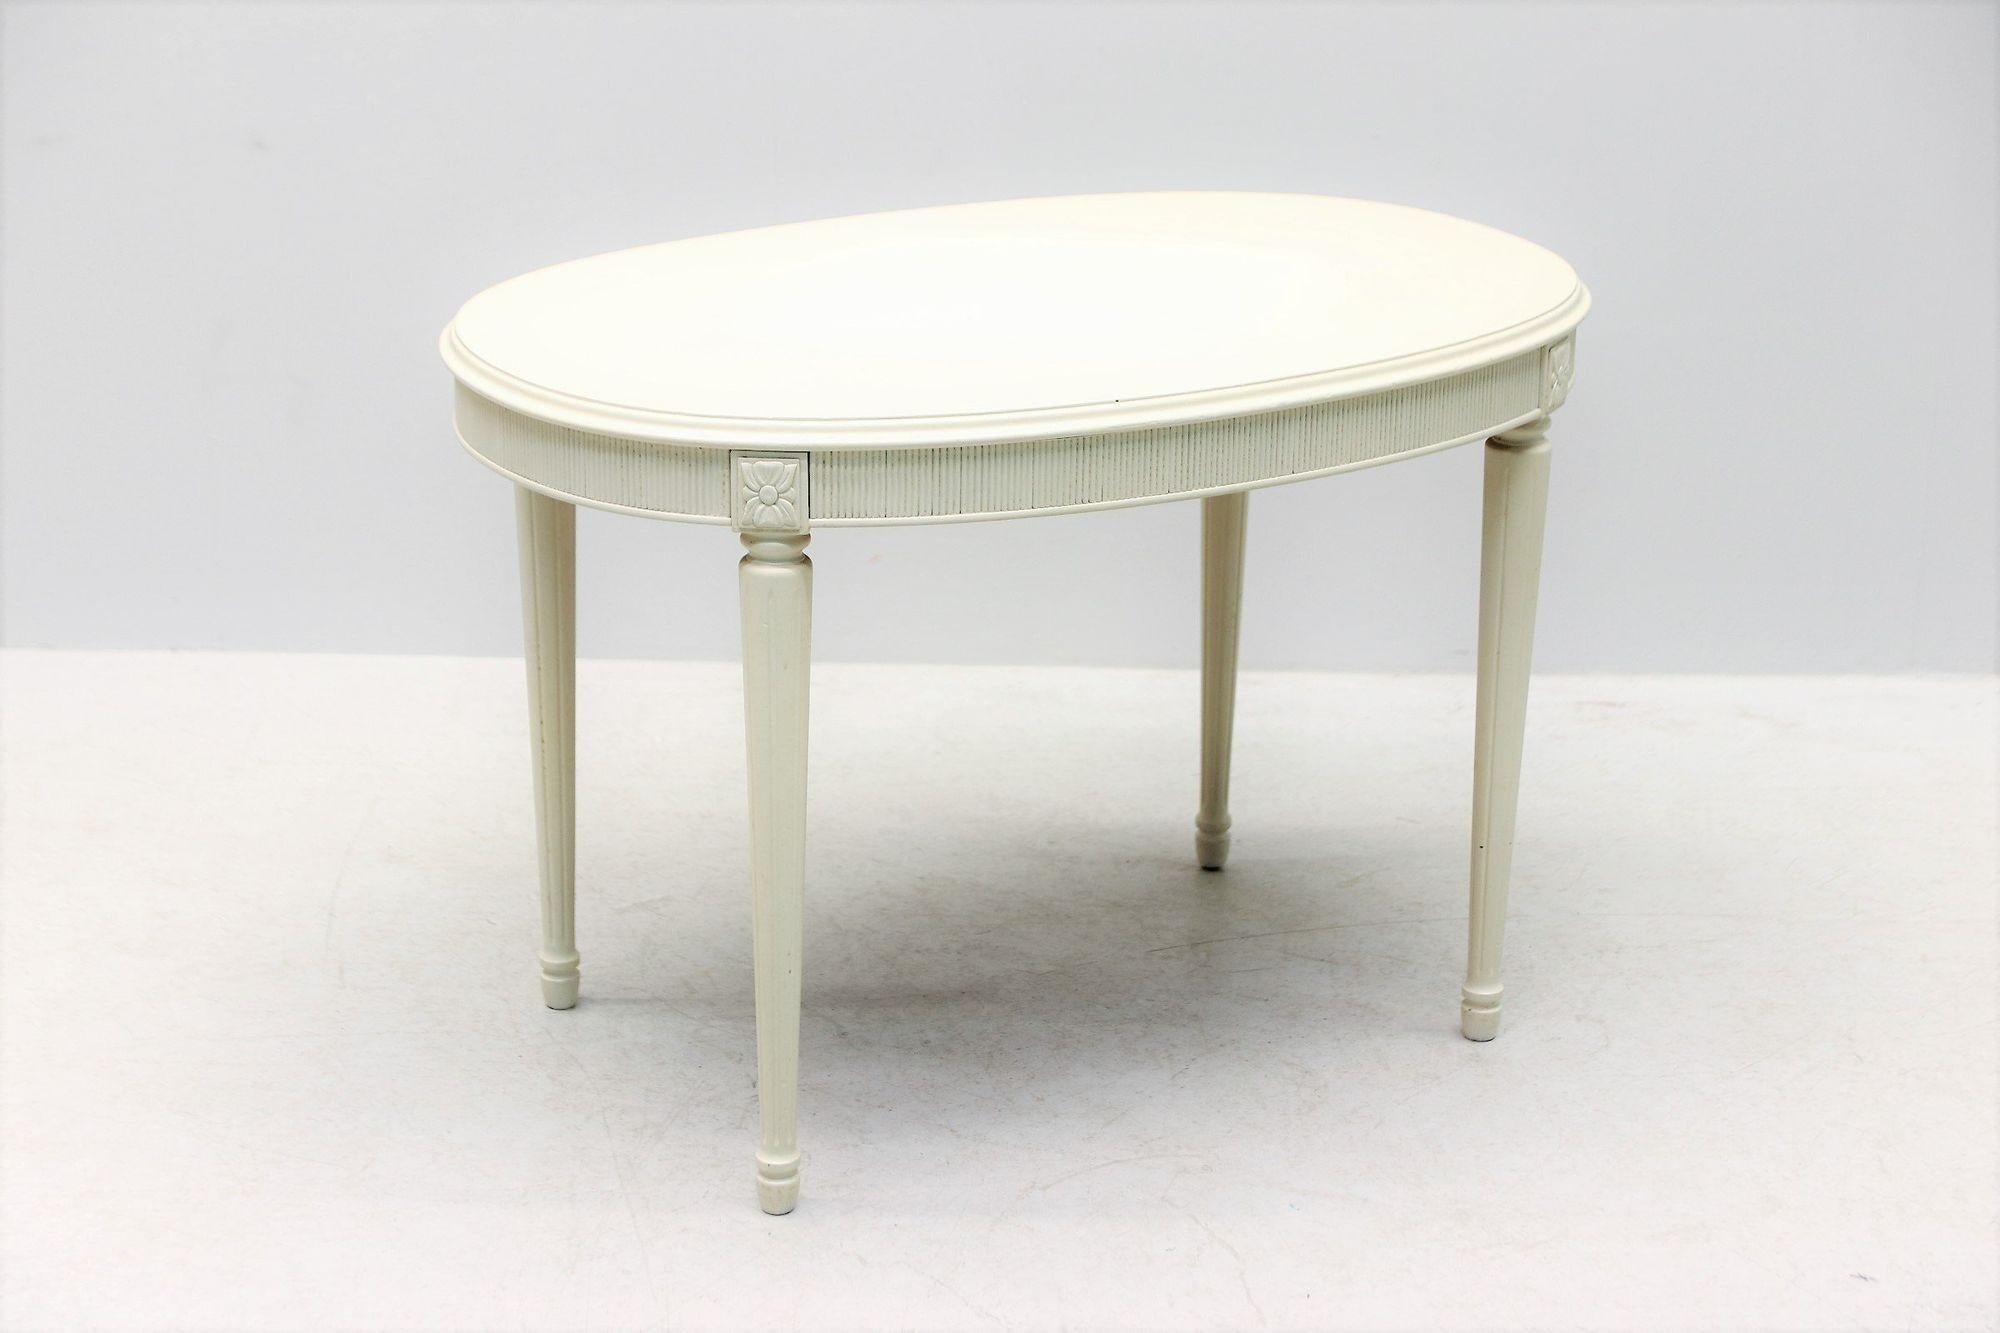 1900s white-painted Swedish Gustavian-style salon table. Simple and stylish, this Gustavian-style salon table from the early 1900s is painted a creamy Swedish white and would make an elegant addition to any room. It features a fluted apron and legs